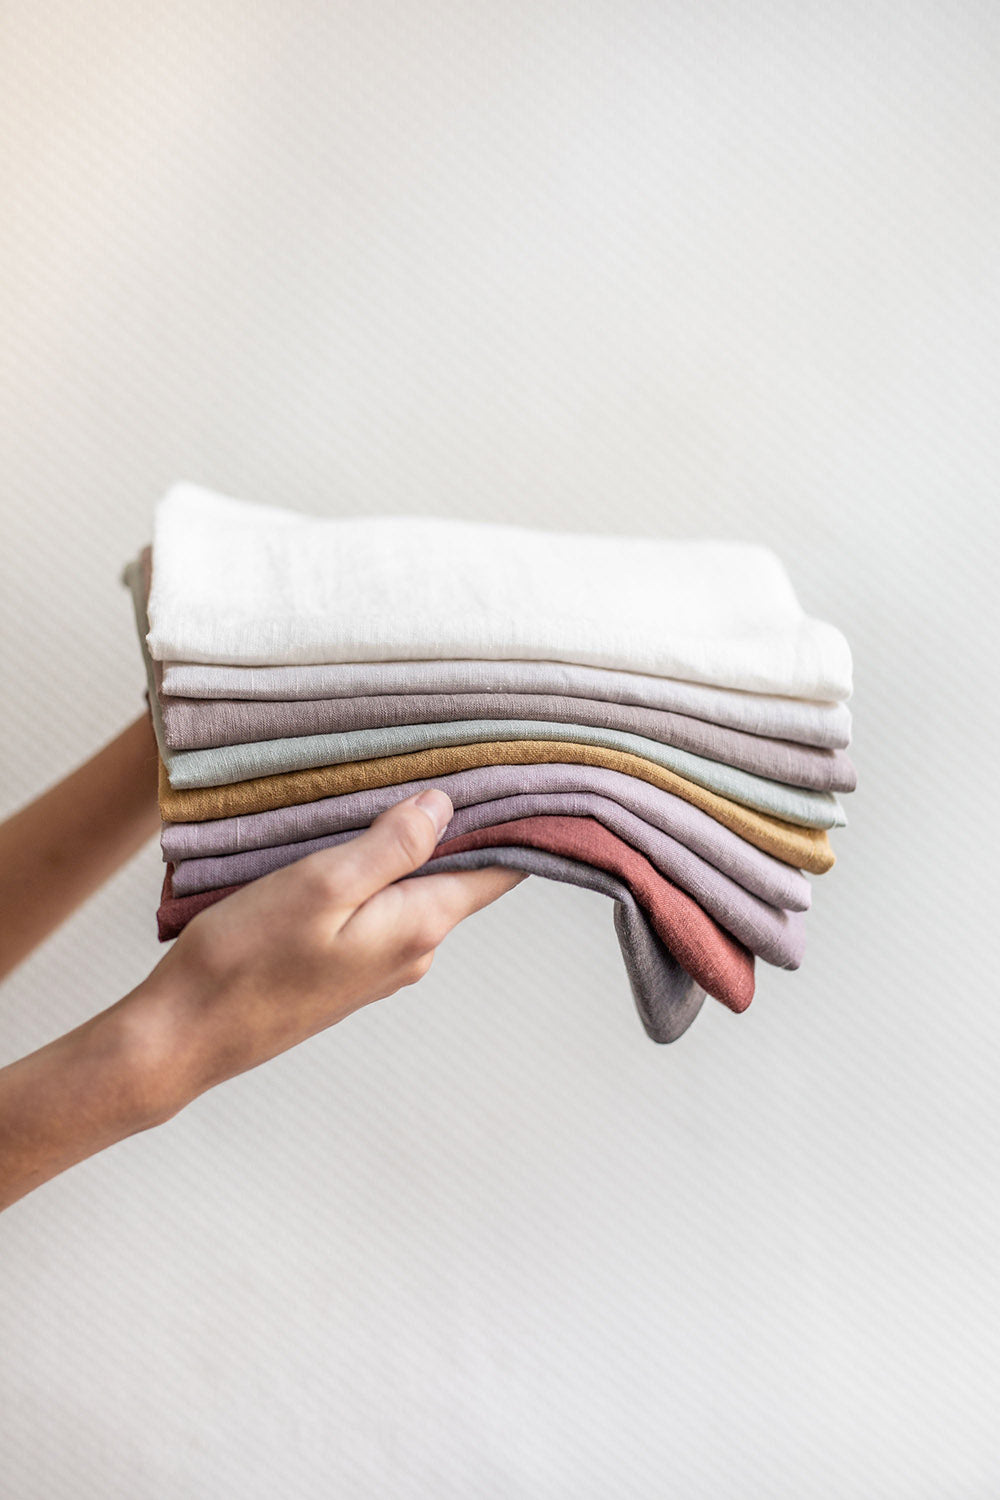 How To Take Care Of Linen? The Only Guide You'll Need!